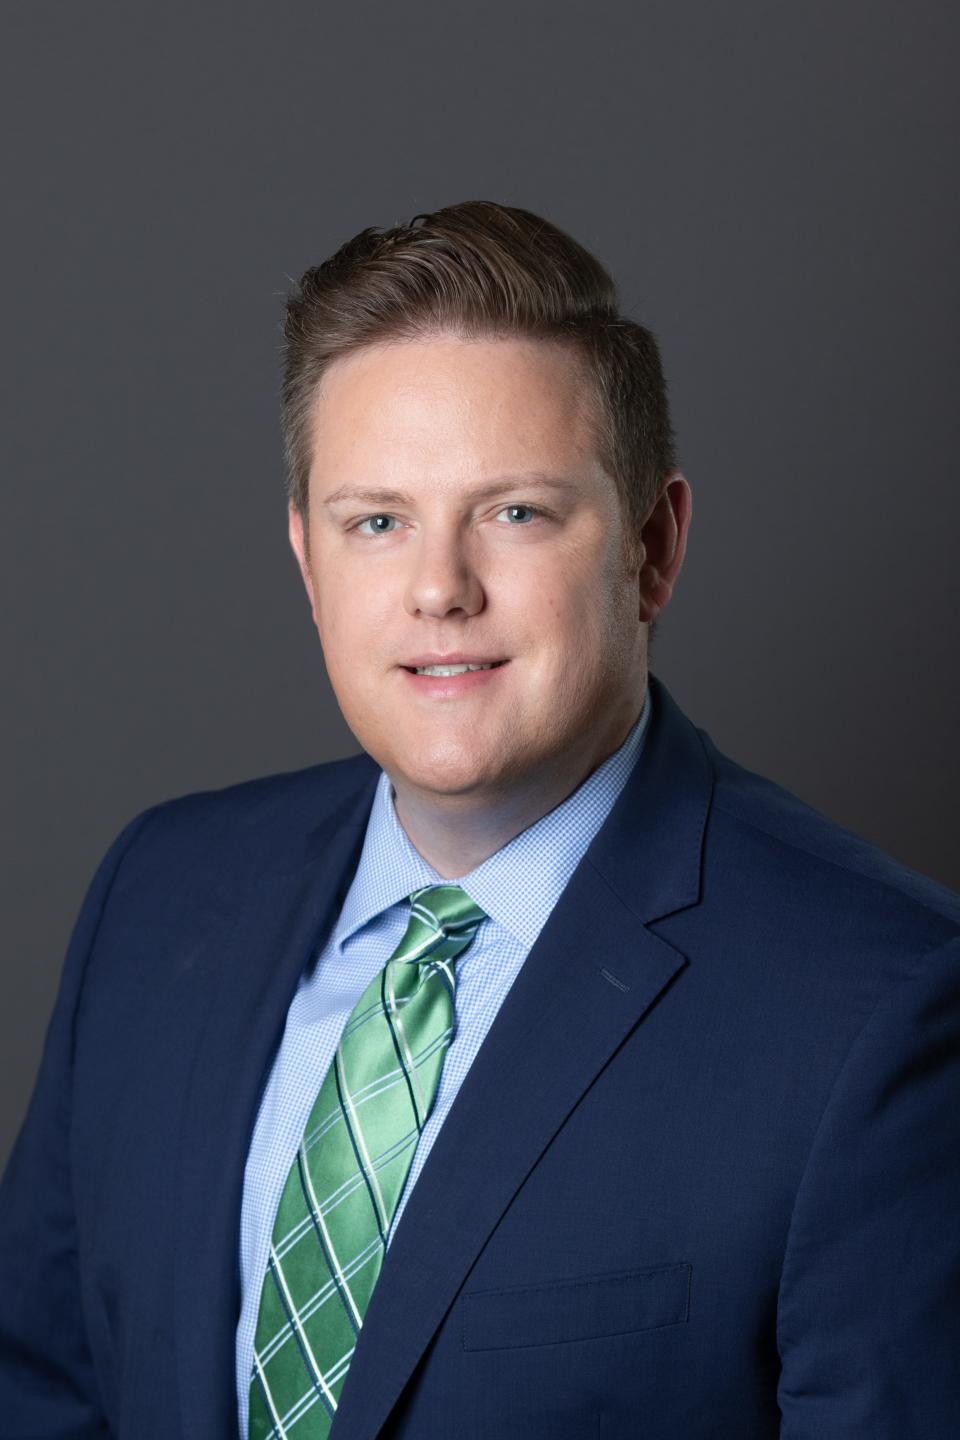 Charles T. Moran is president of the Log Cabin Republicans, the nation's largest Republican organization dedicated to representing LGBT conservatives and allies. (Photo: Provided/Log Cabin Republicans/Keith Mellnick)